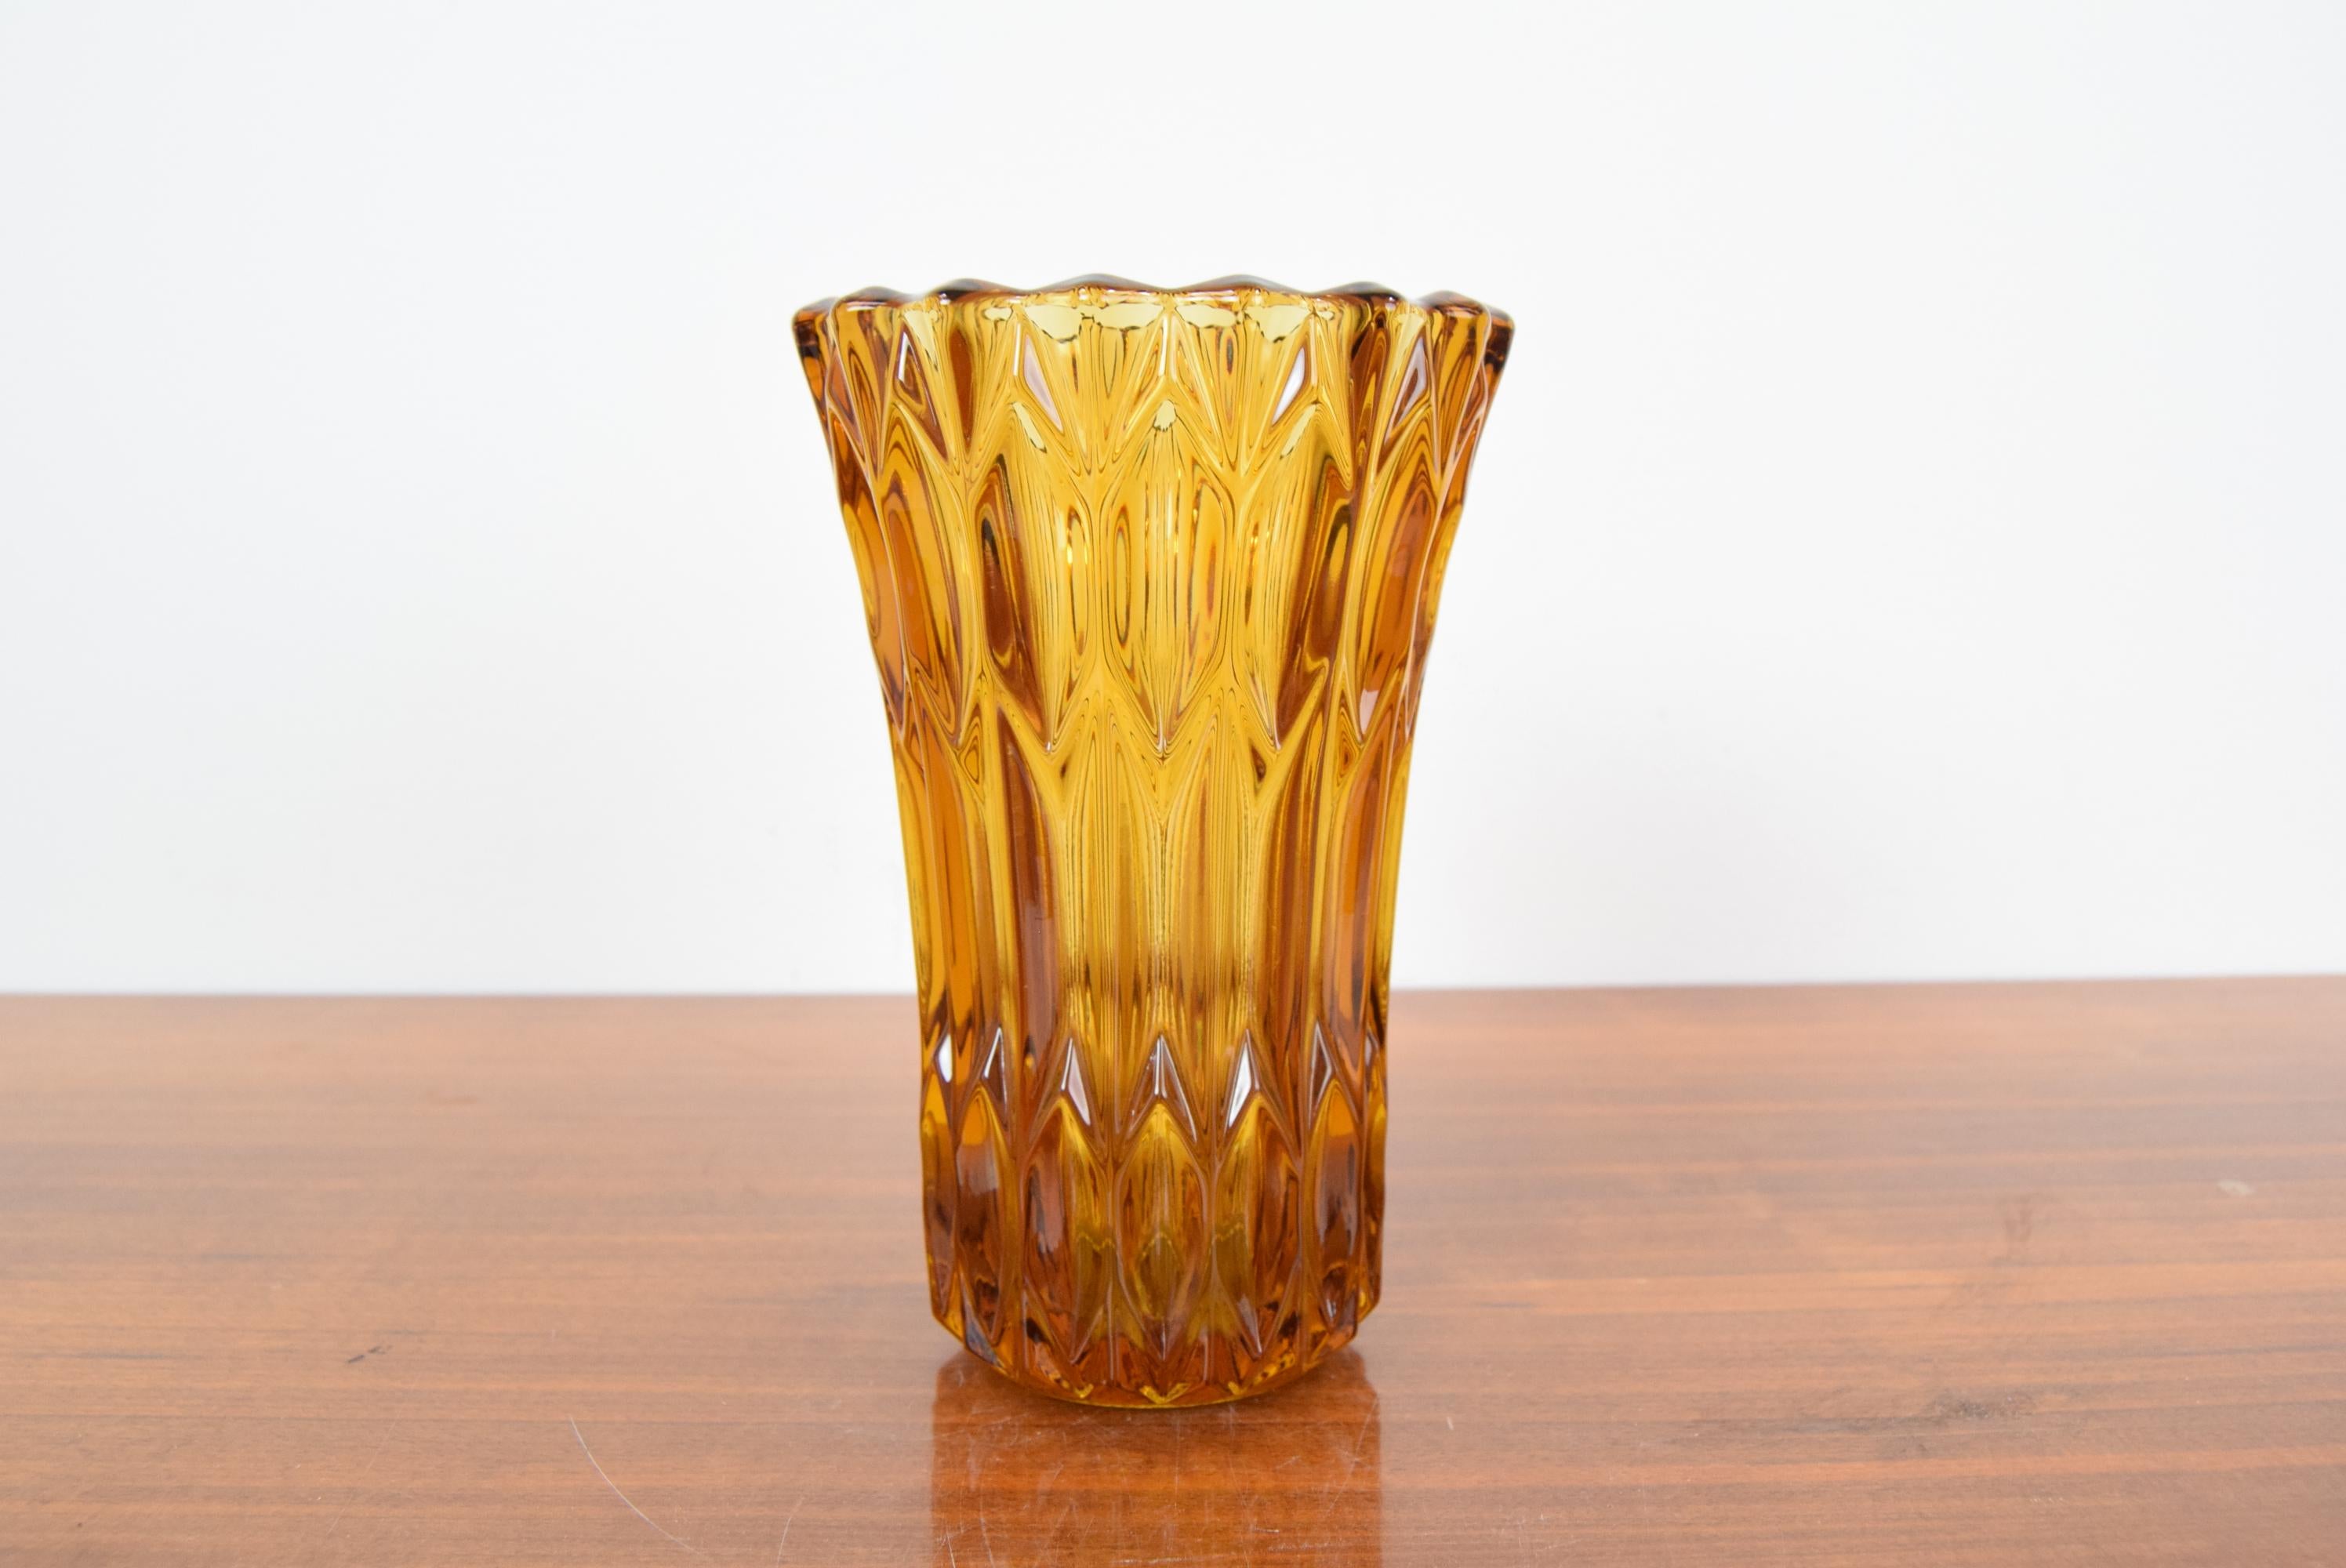 Made in Czechoslovakia
Made of Art Glass
Re-Polished
Good Original Condition.